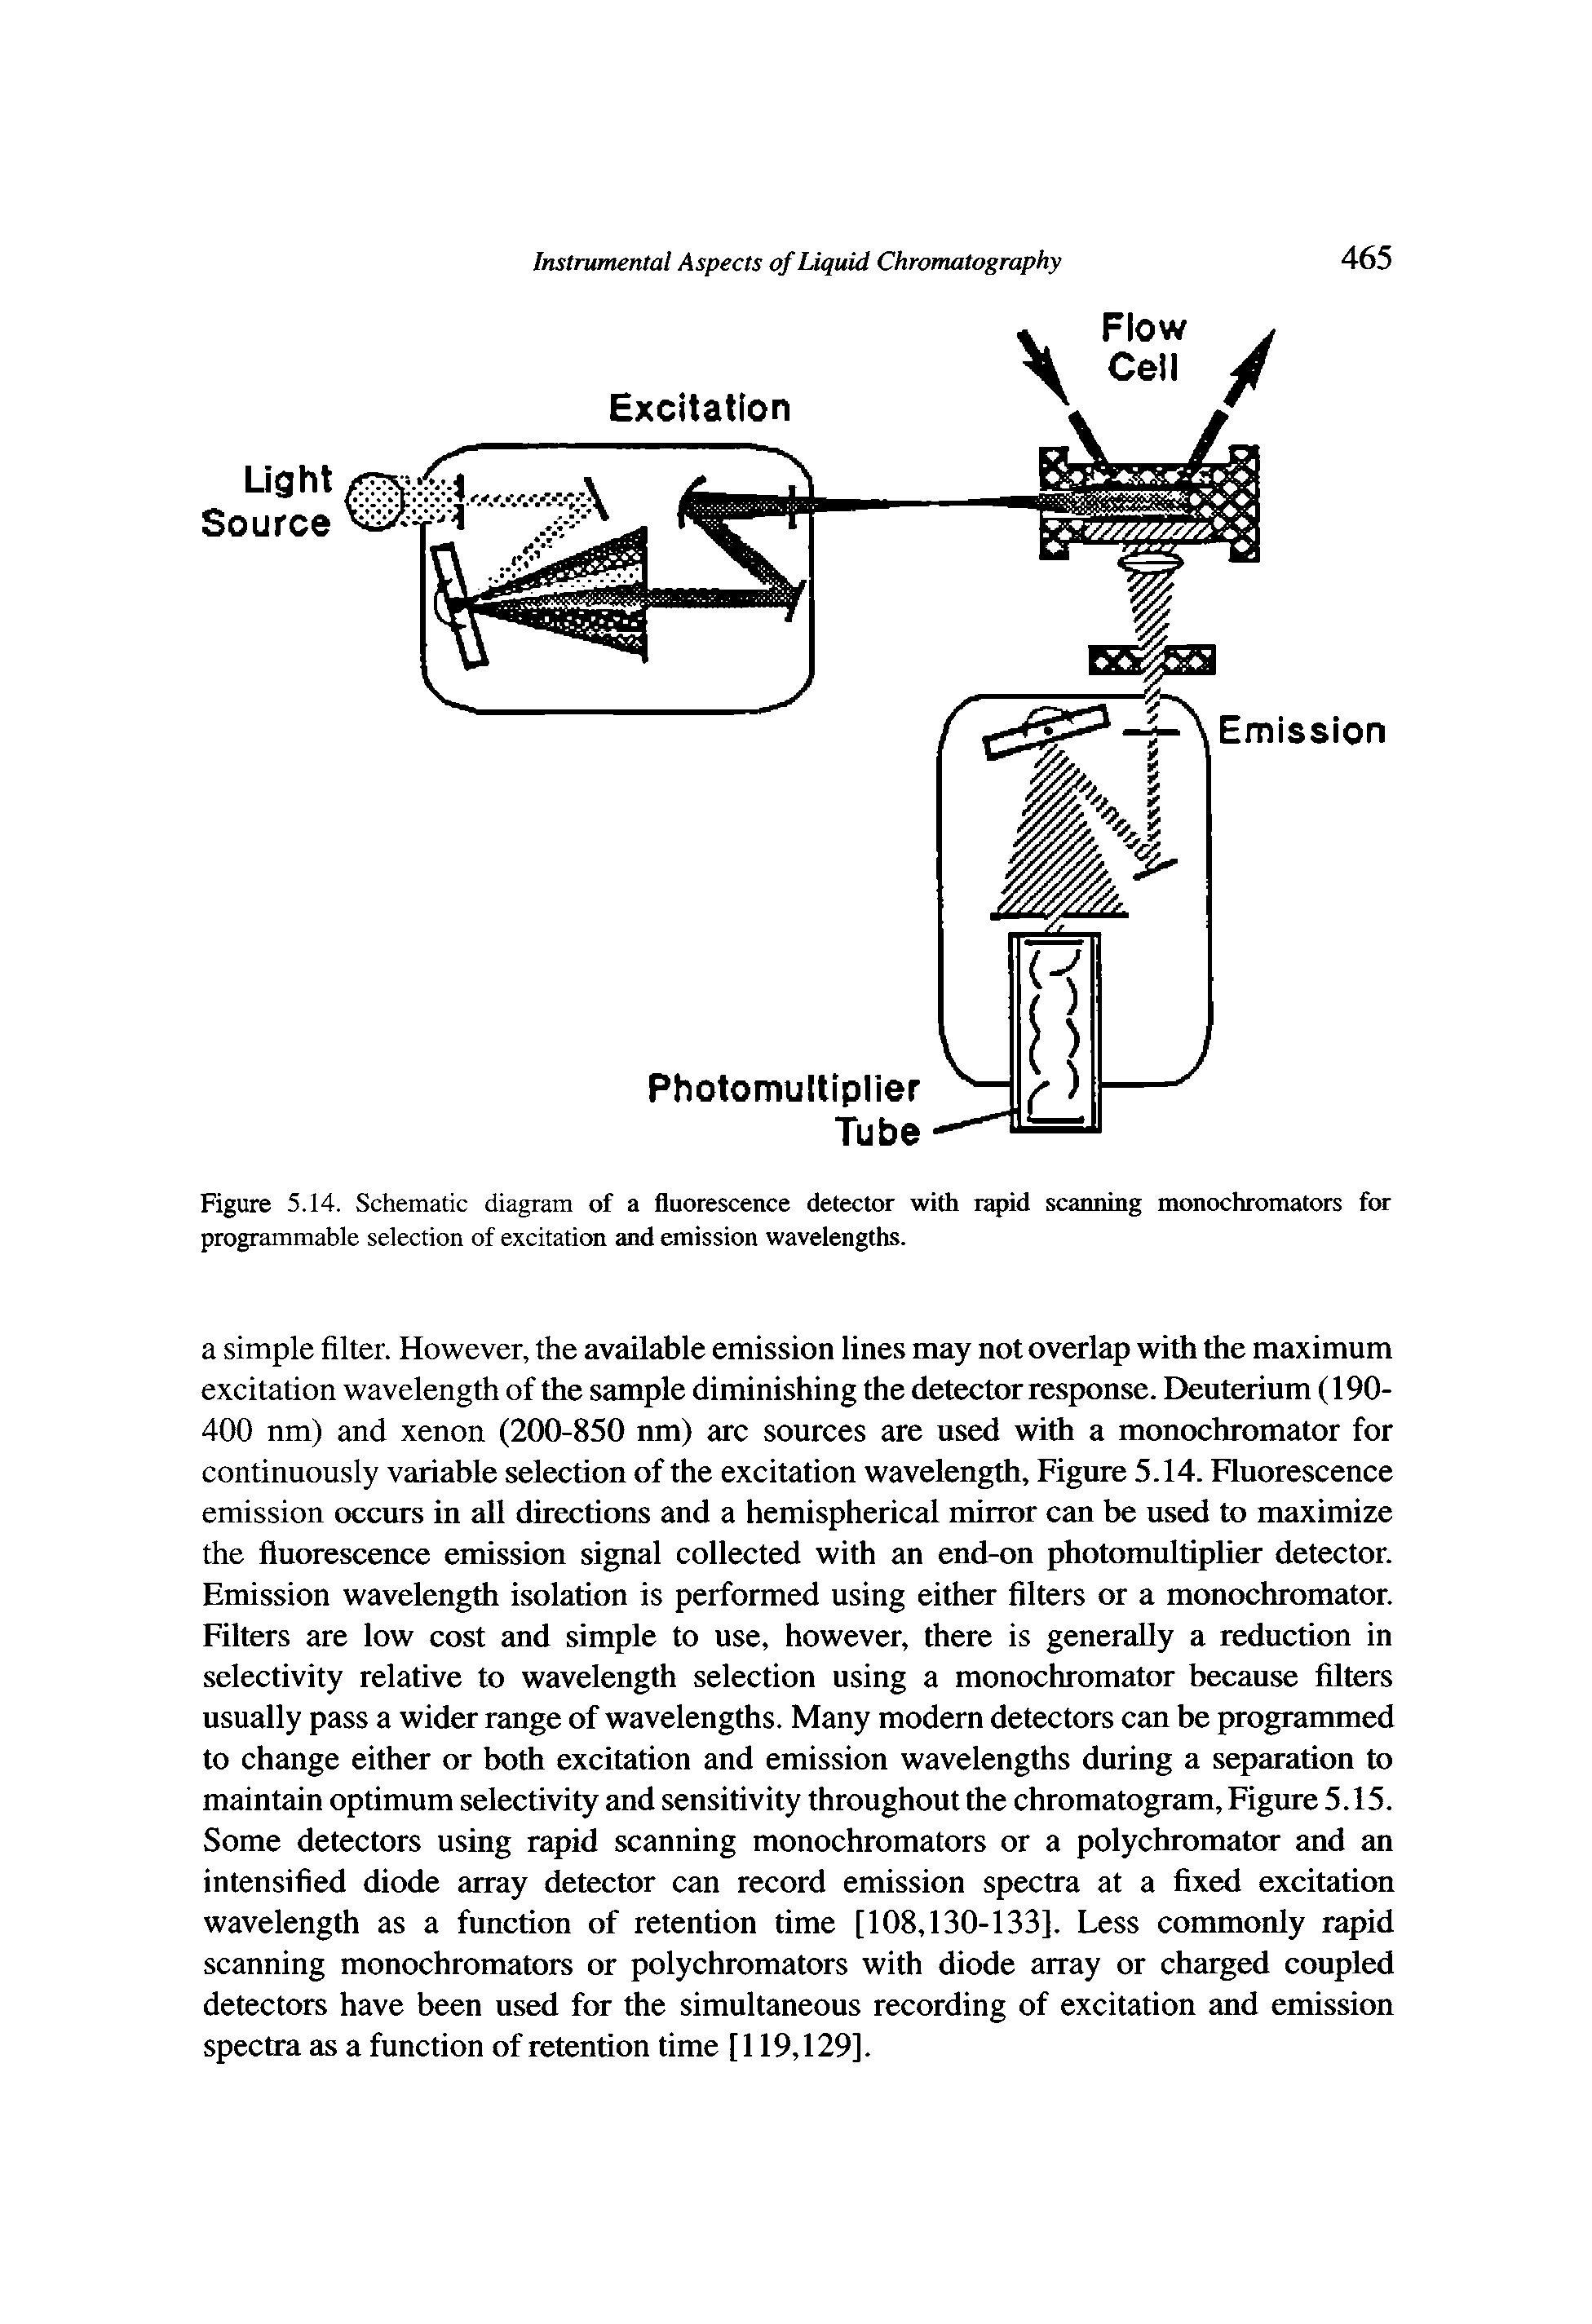 Figure 5.14. Schematic diagram of a fluorescence detector with rapid scanning monochromators for programmable selection of excitation and emission wavelengths.